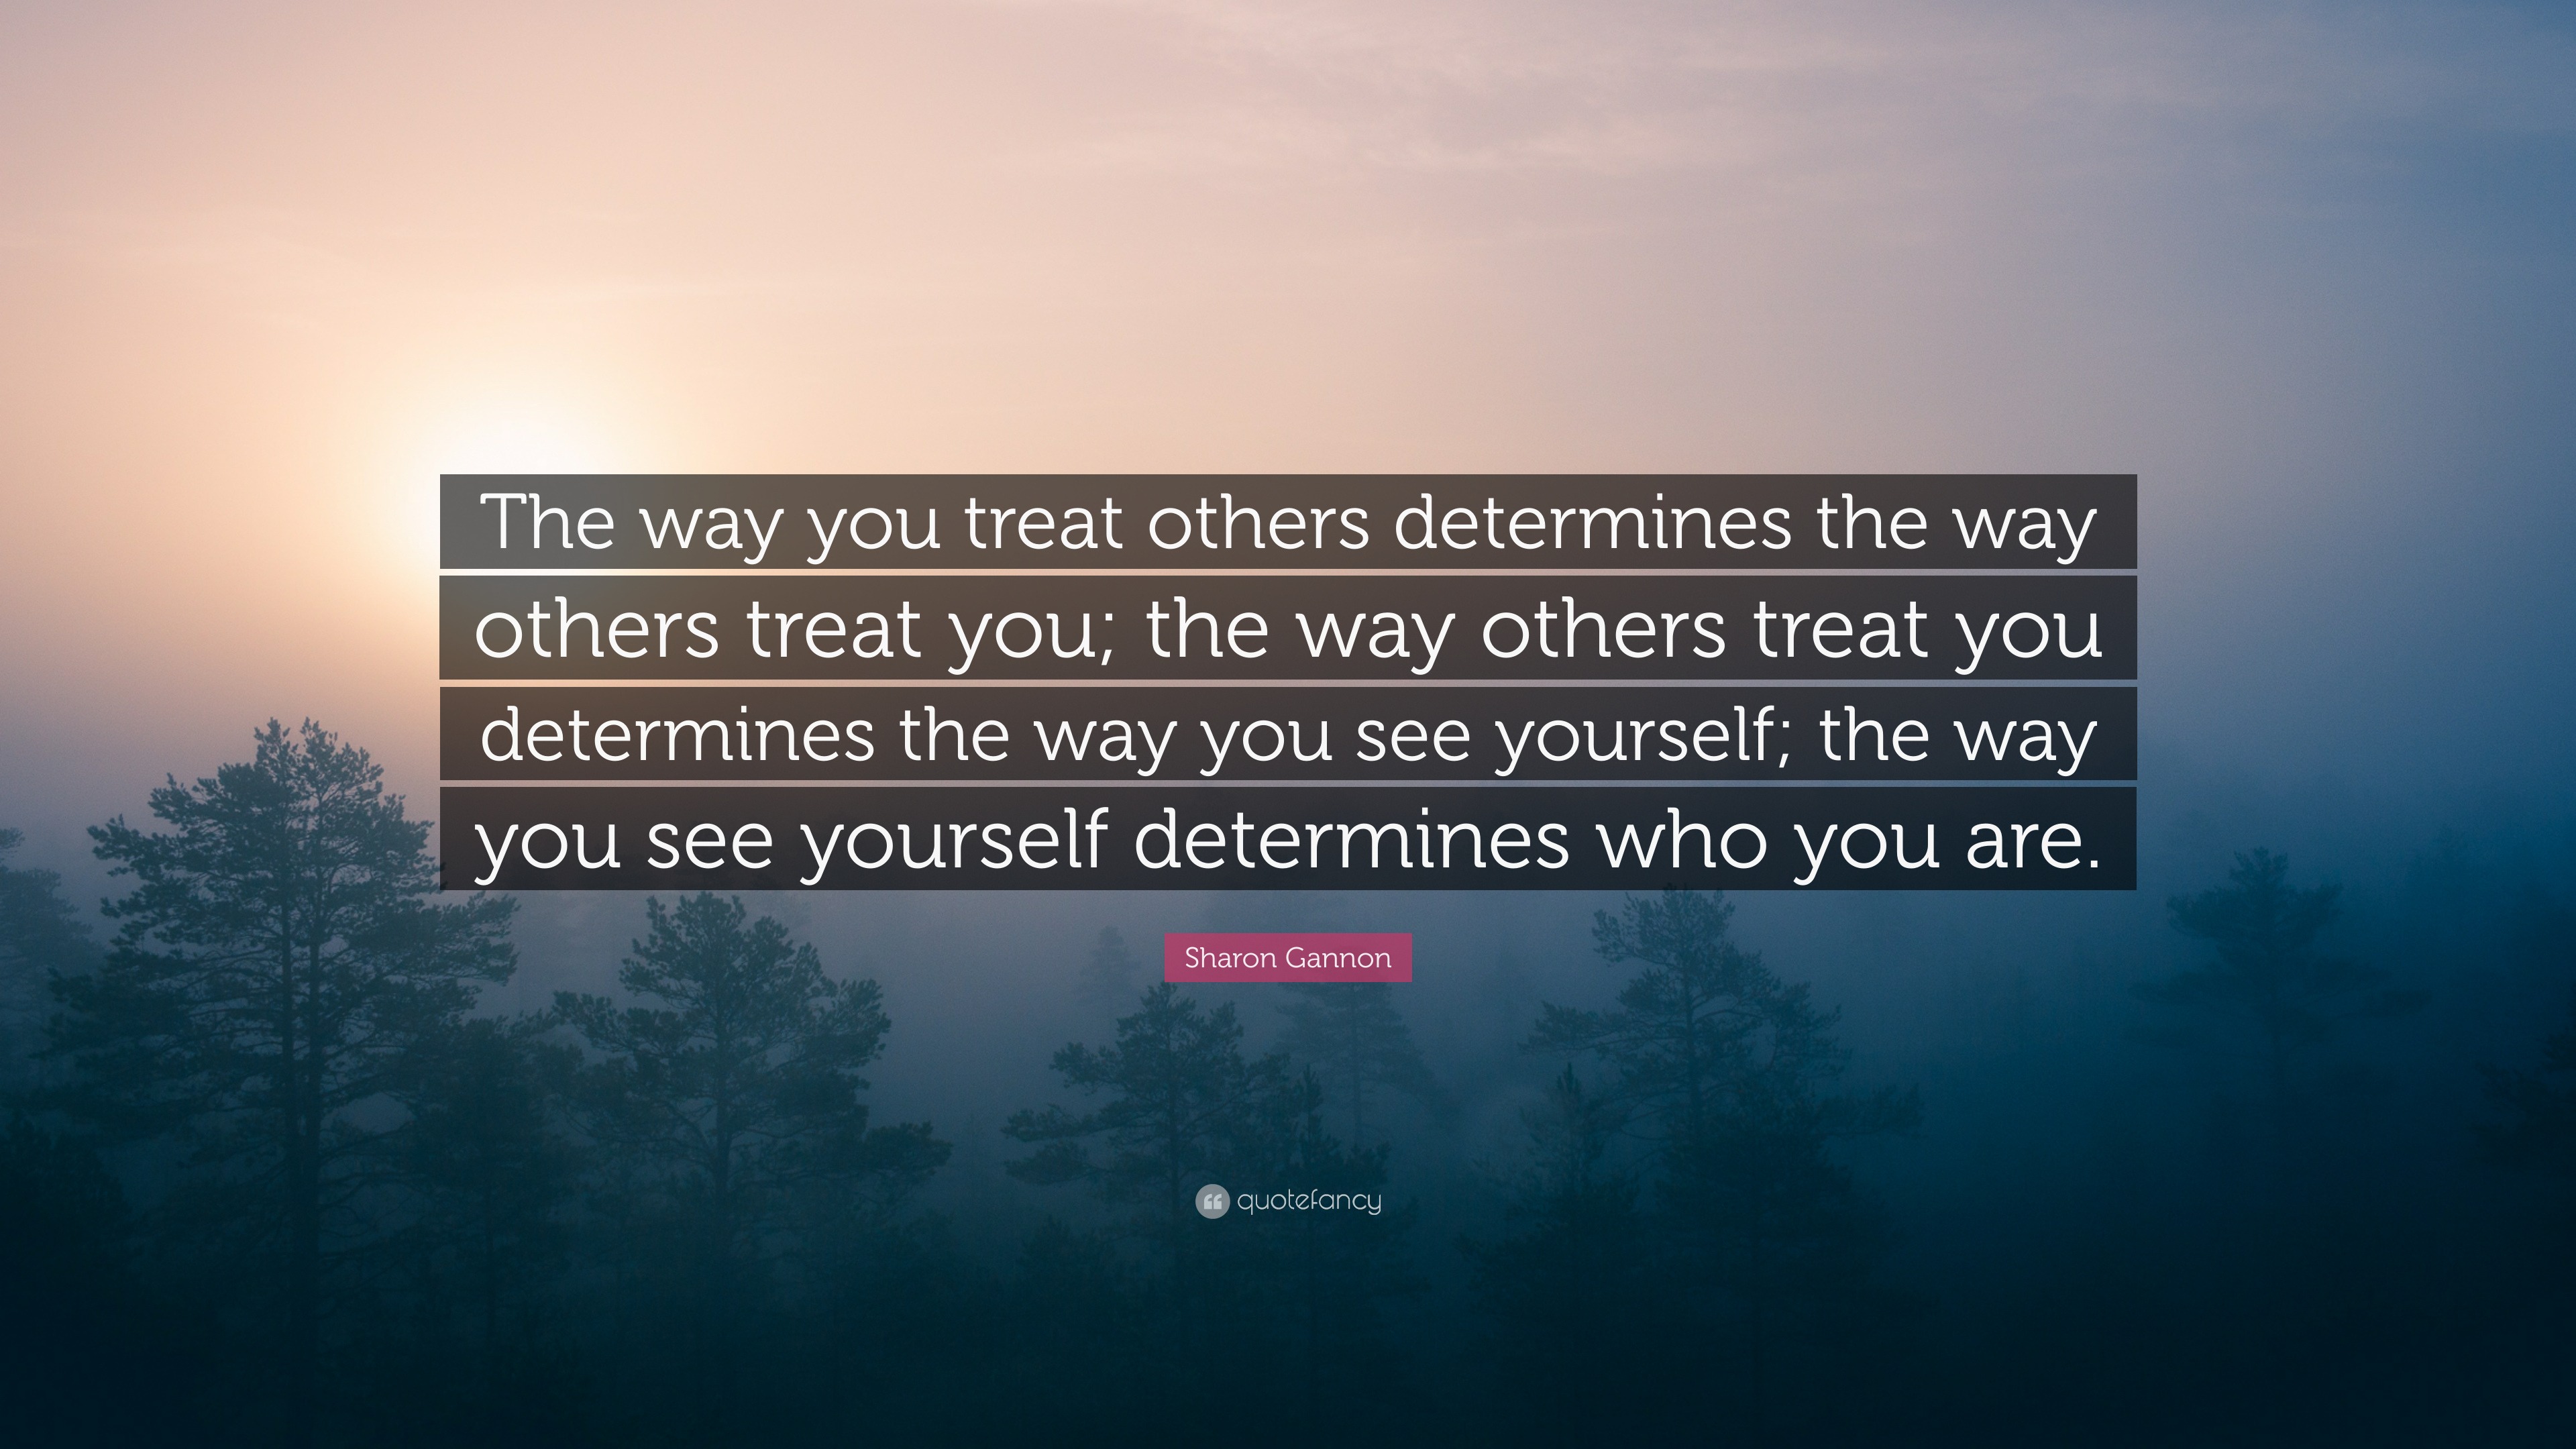 Sharon Gannon Quote: “The way you treat others determines the way